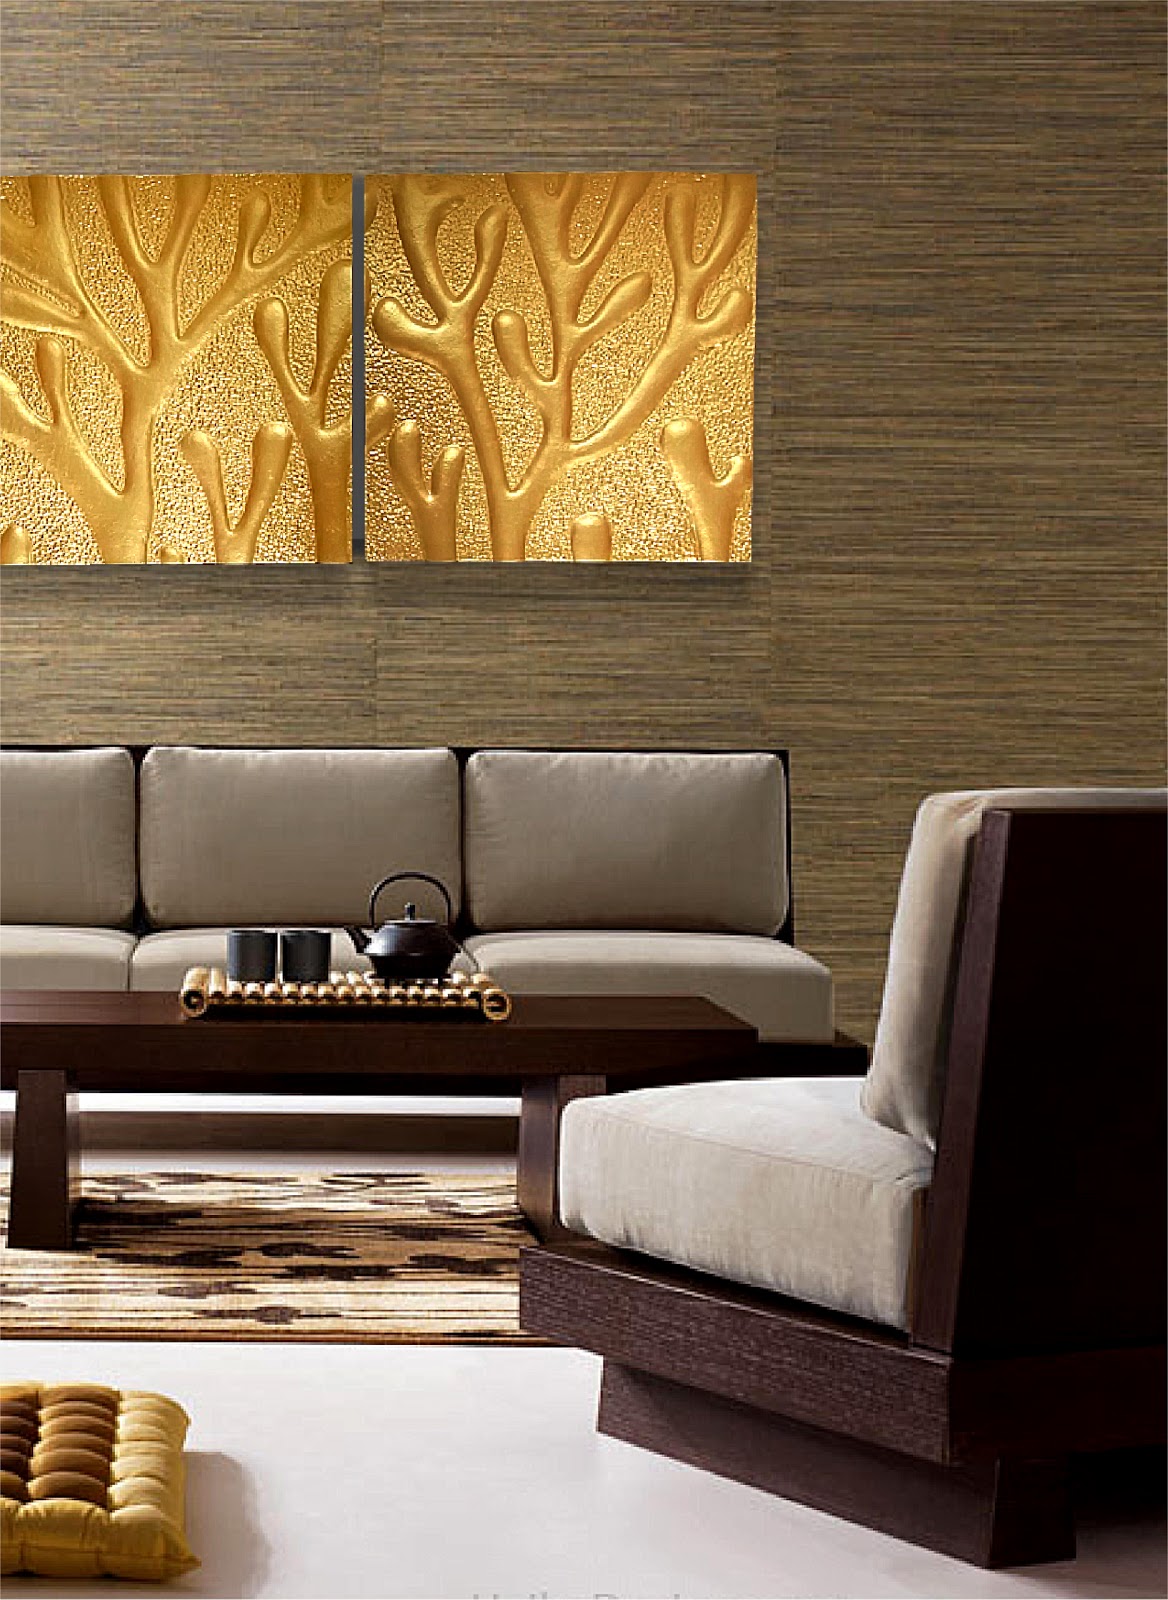 Singapore's latest trend for wall decoration, call 93657637